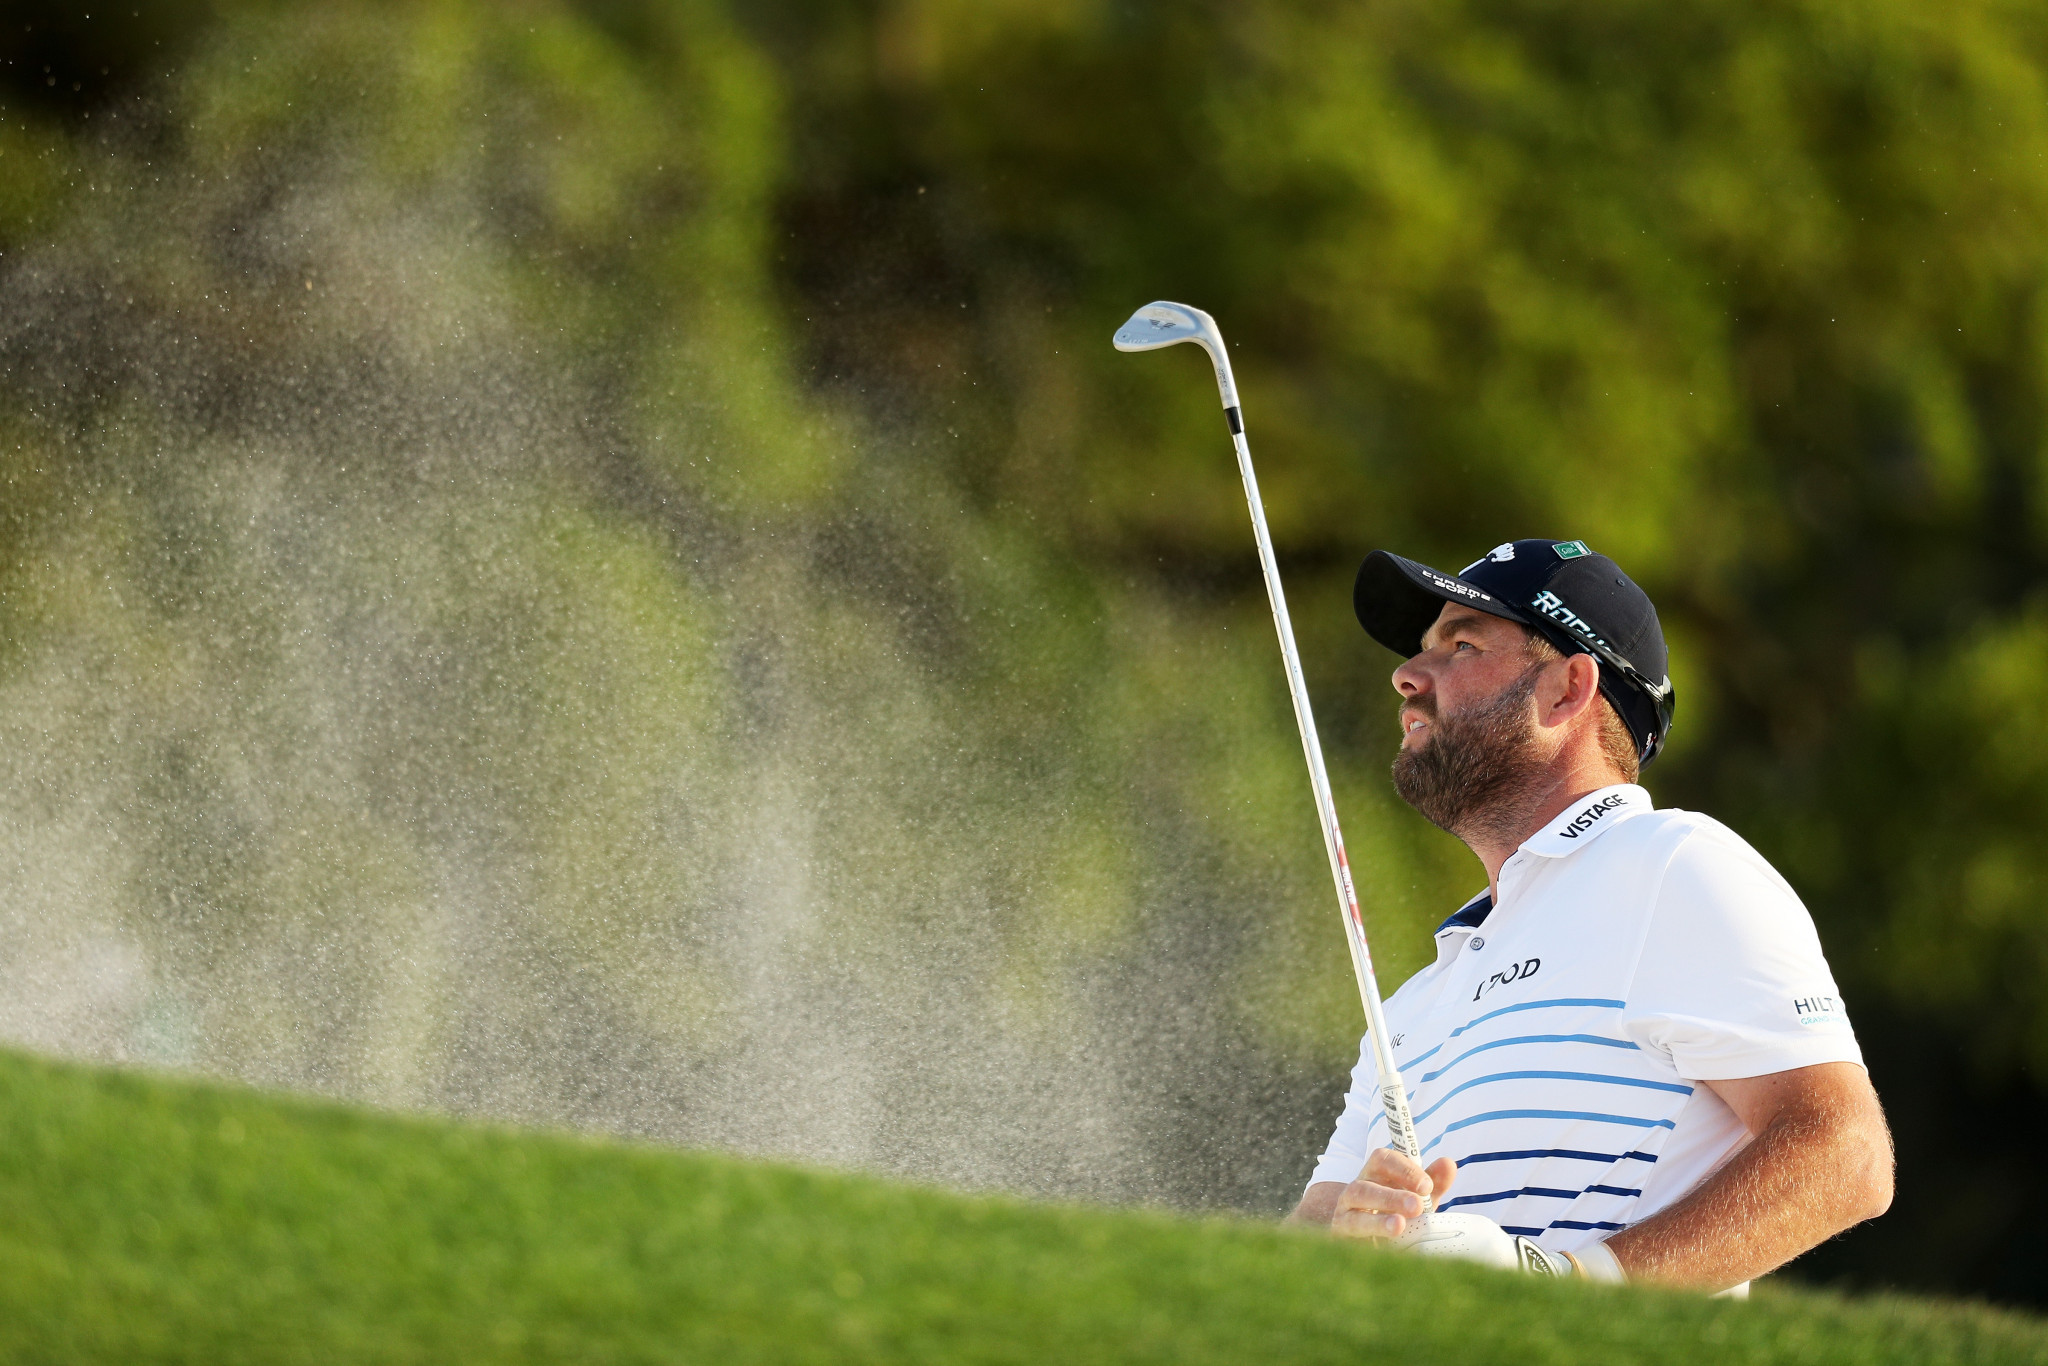 Australian Marc Leishman is second, two shots adrift of leader Patrick Reed ©Getty Images